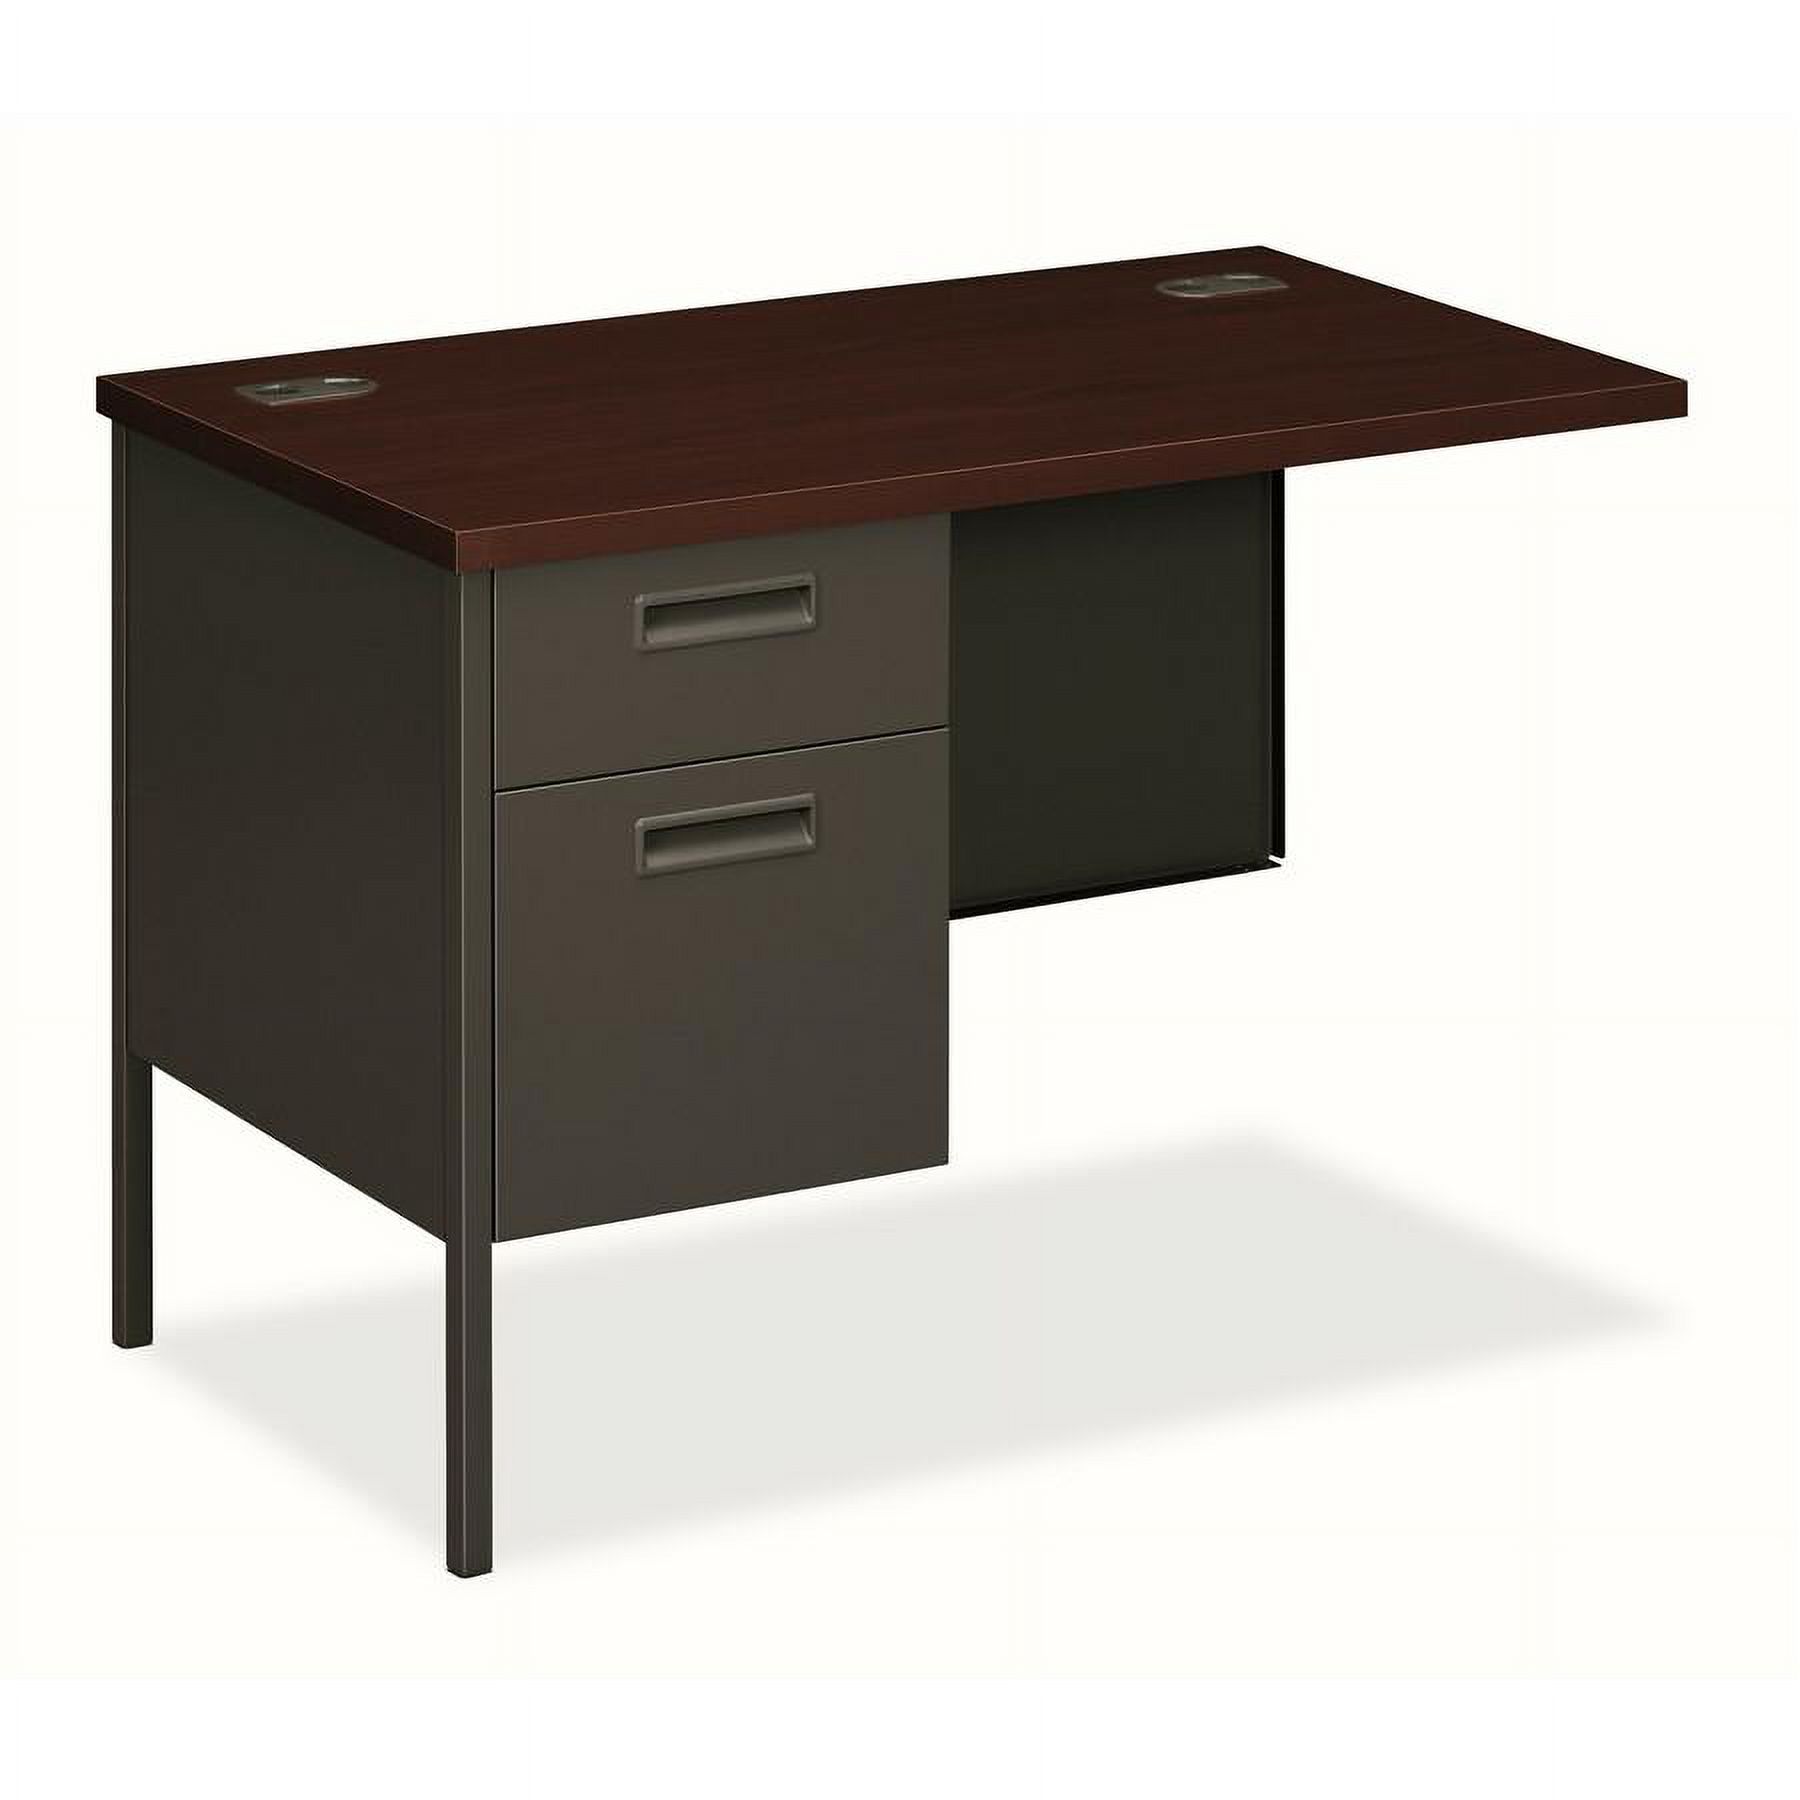 HON Metro Classic Left Return, 42"W - 2-Drawer 42" x 24" x 29.5" - 2 x Box Drawer(s), File Drawer(s) - Single Pedestal on Left Side - Material: Steel - Finish: Charcoal, Laminate, Mahogany - image 3 of 3